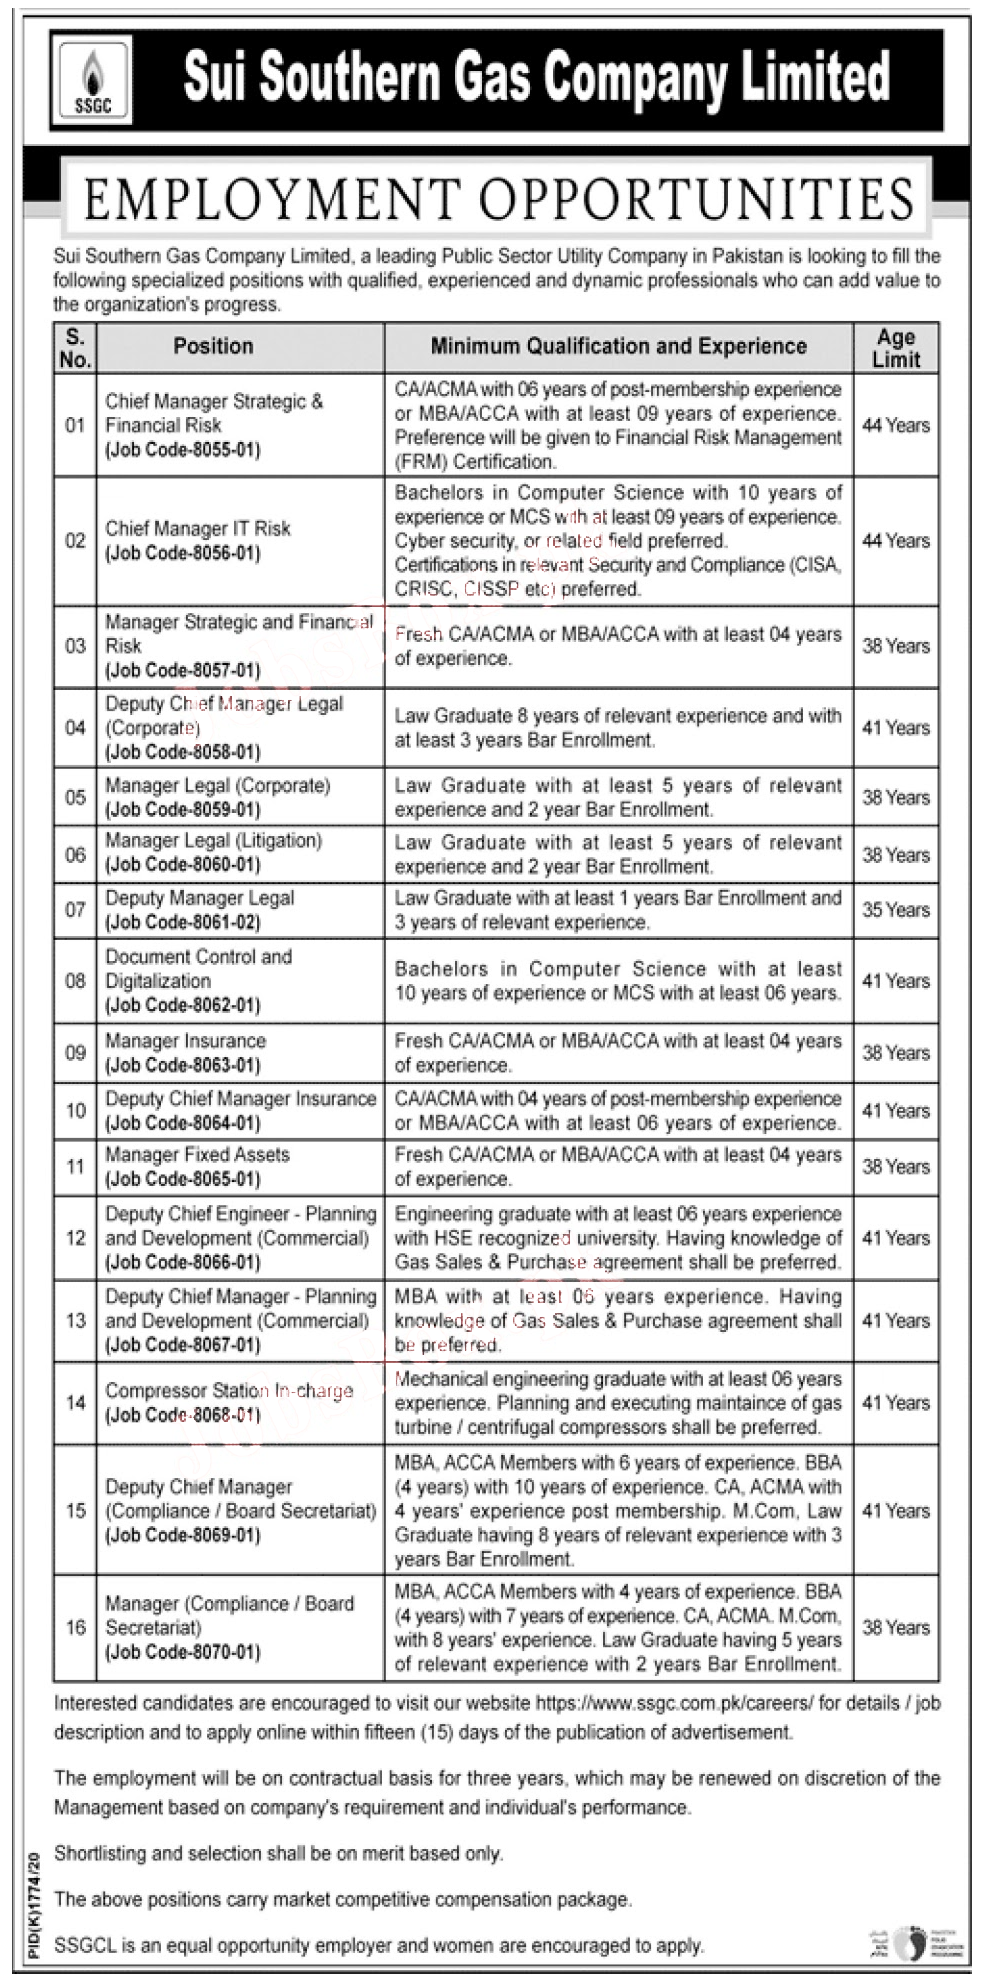 SSGC Jobs 2022 | Sui Southern Gas Company Jobs 2022